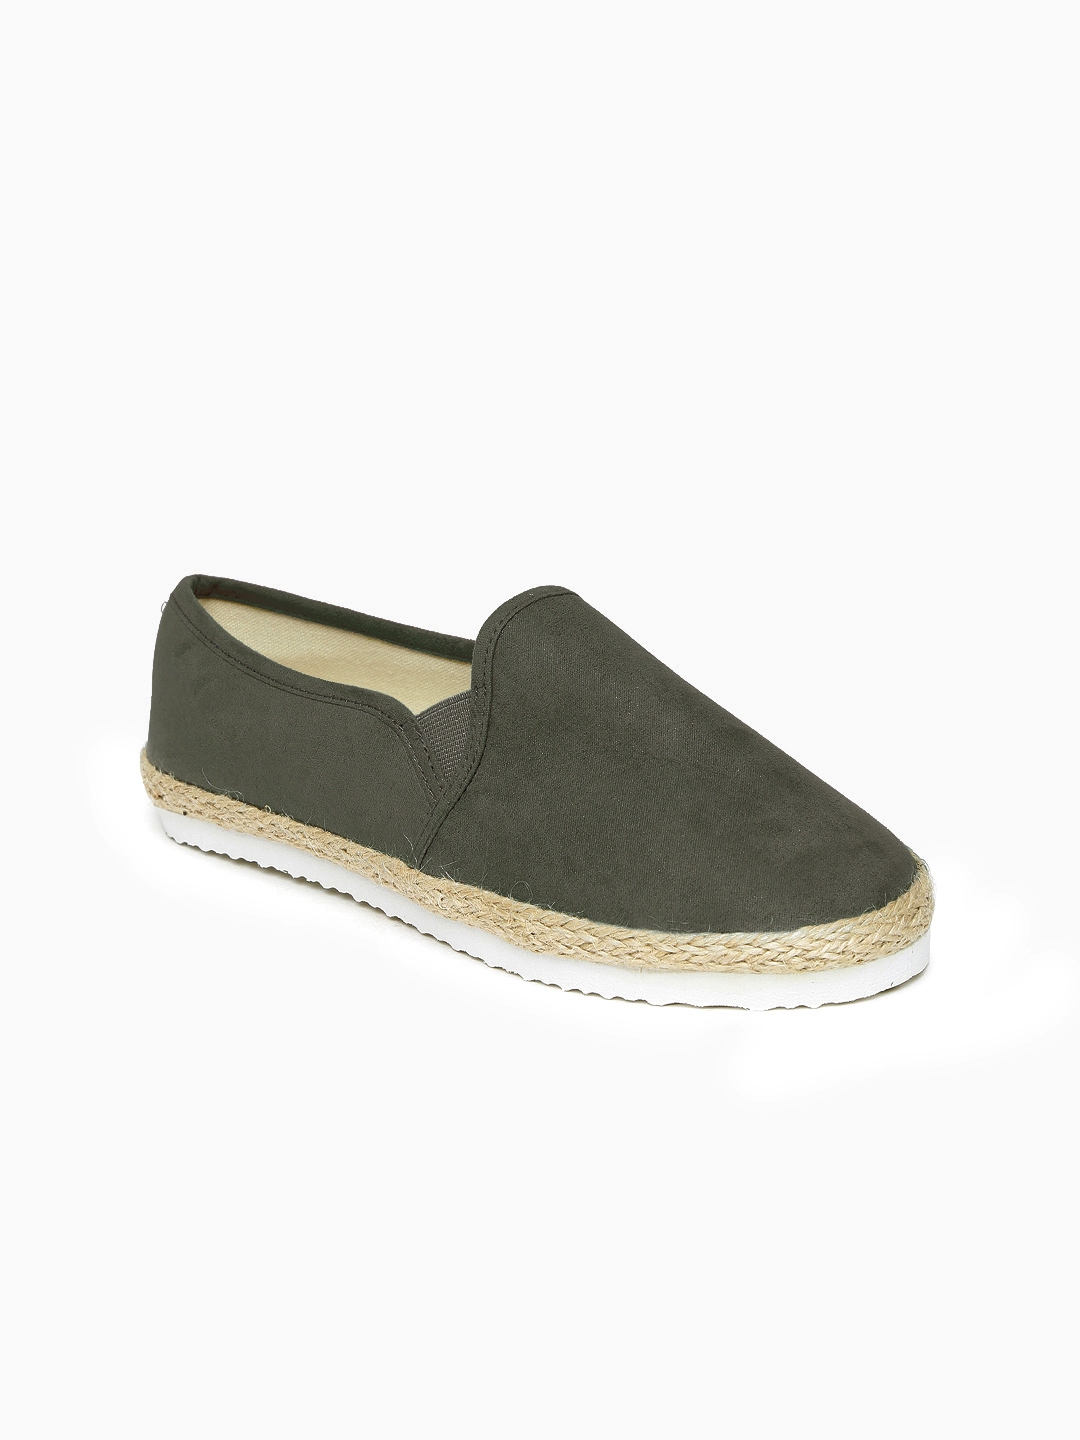 Olive Green Espadrilles - Casual Shoes 